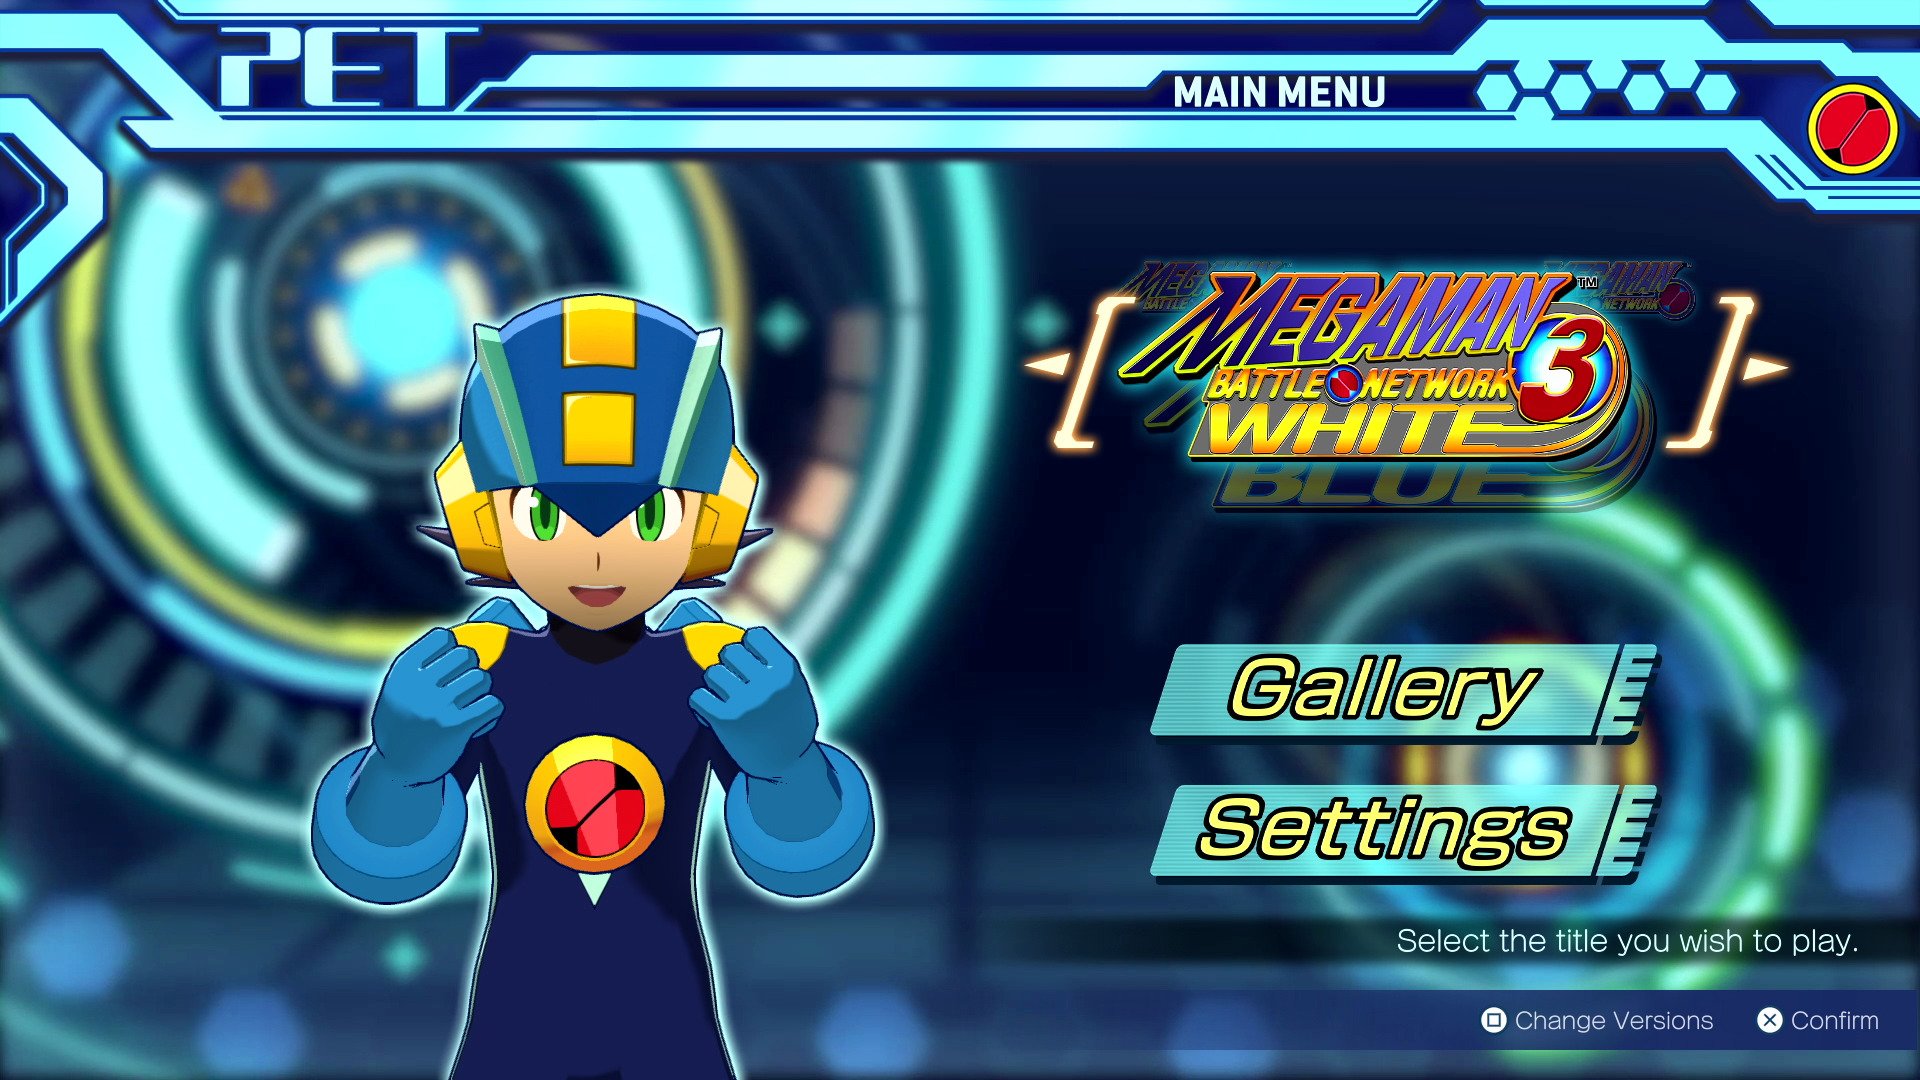 NetBattle Arena: A multiplayer software game where users can engage in virtual battles with their Megaman EXE Plush and compete against other NetNavis.
NetNavi Customizer: A software tool that allows users to customize and personalize their Megaman EXE Plush's appearance, abilities, and behavior.